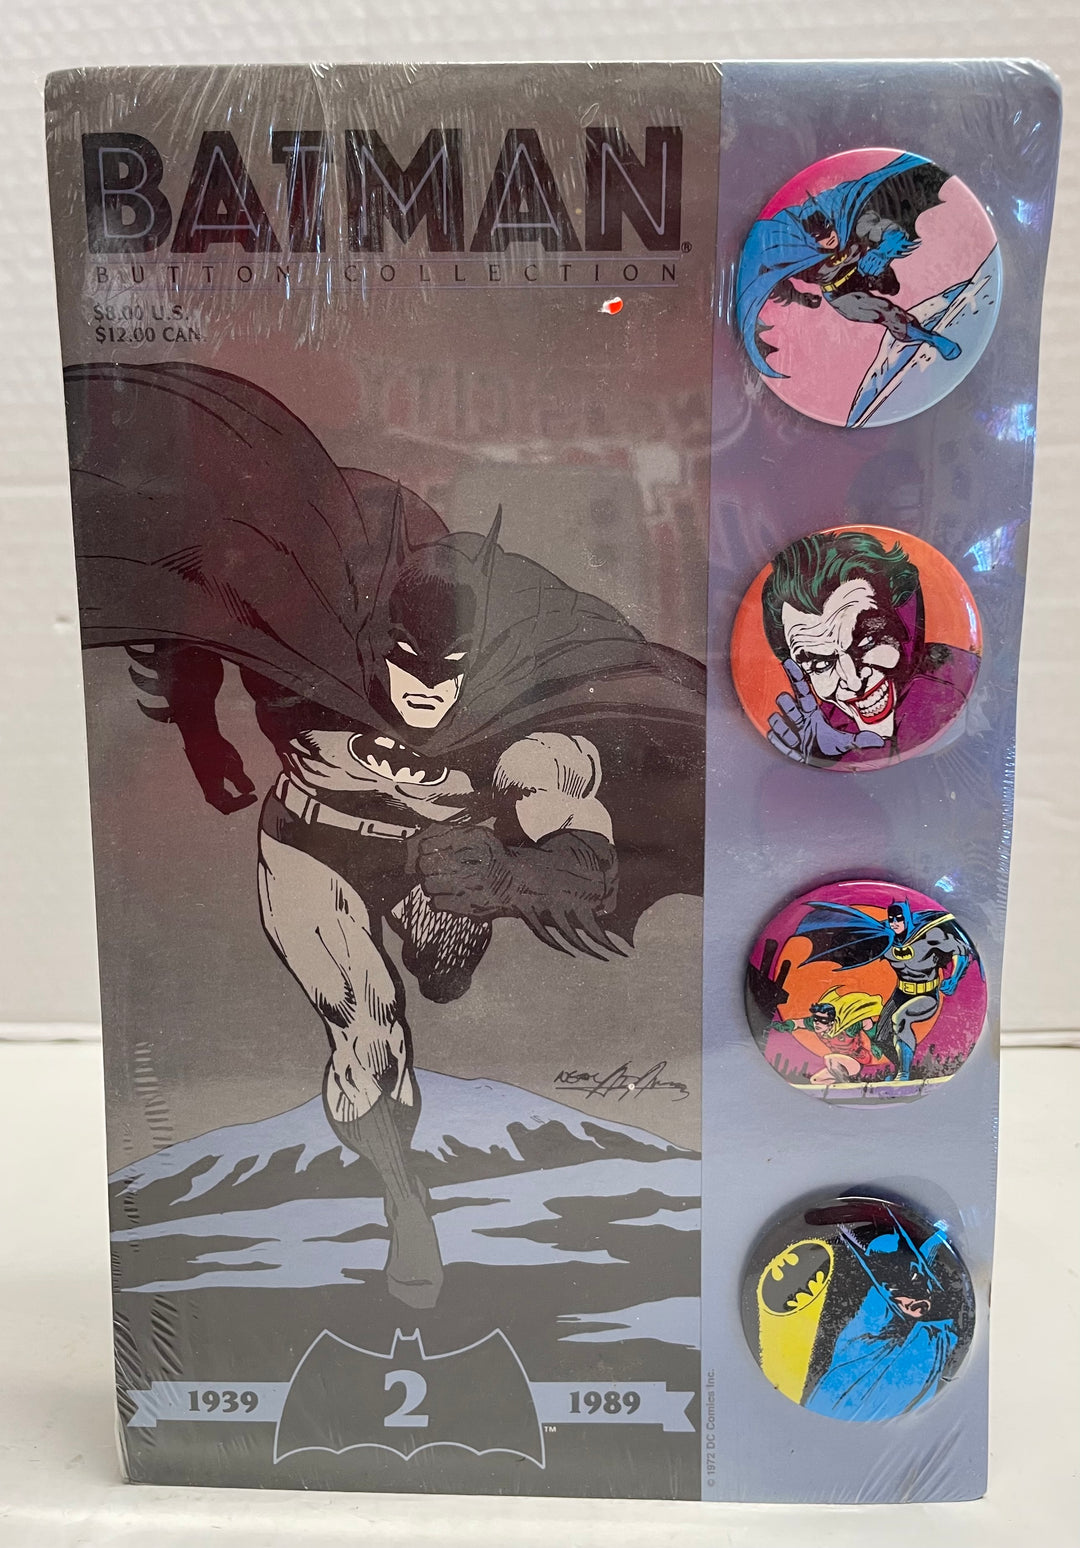 Batman 6 Button Collection 1939-1989 DC Comics New on Sealed Board